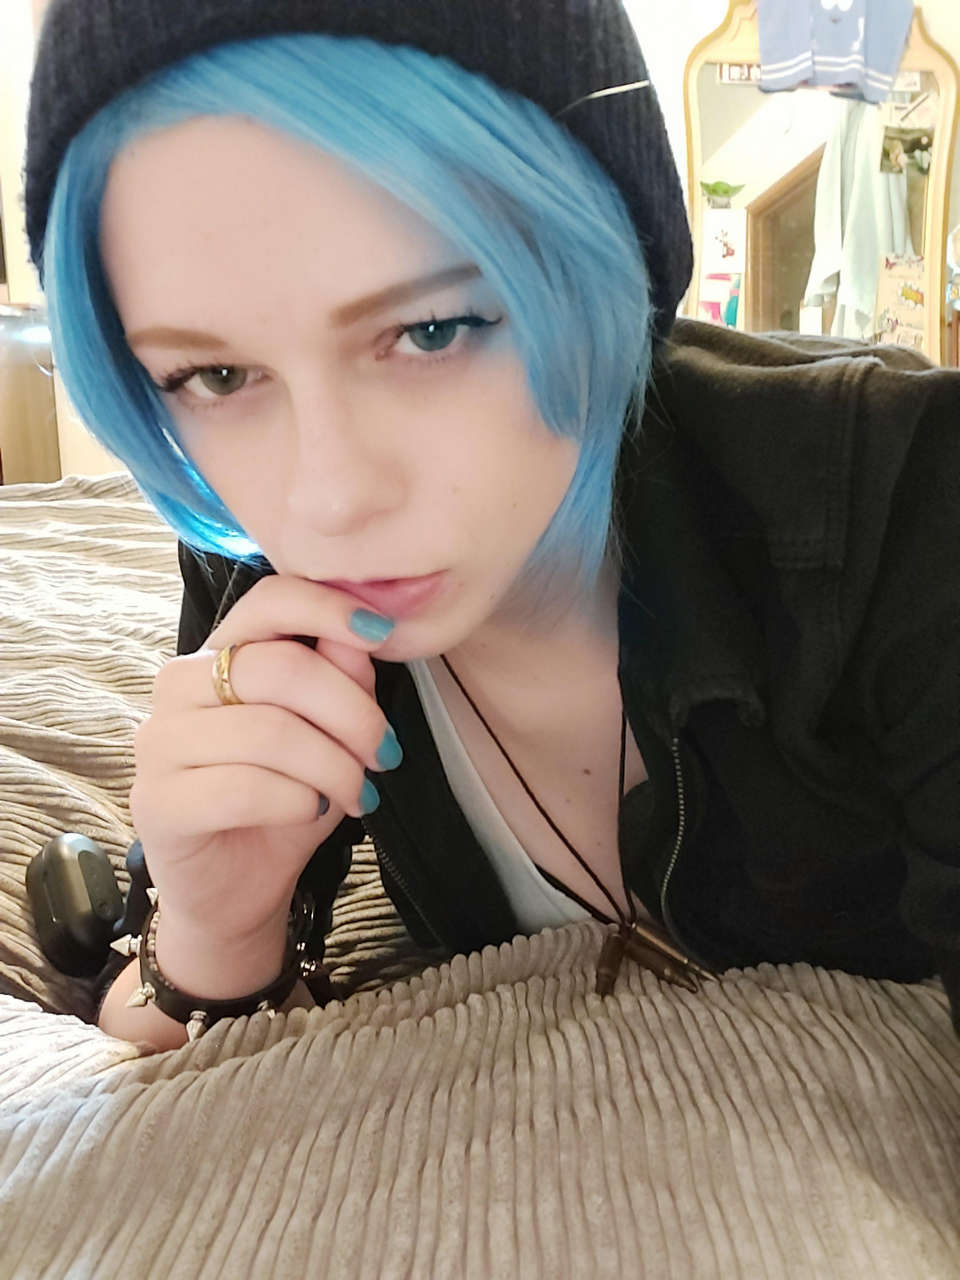 Chloe Price Cosplay From Life Is Strang